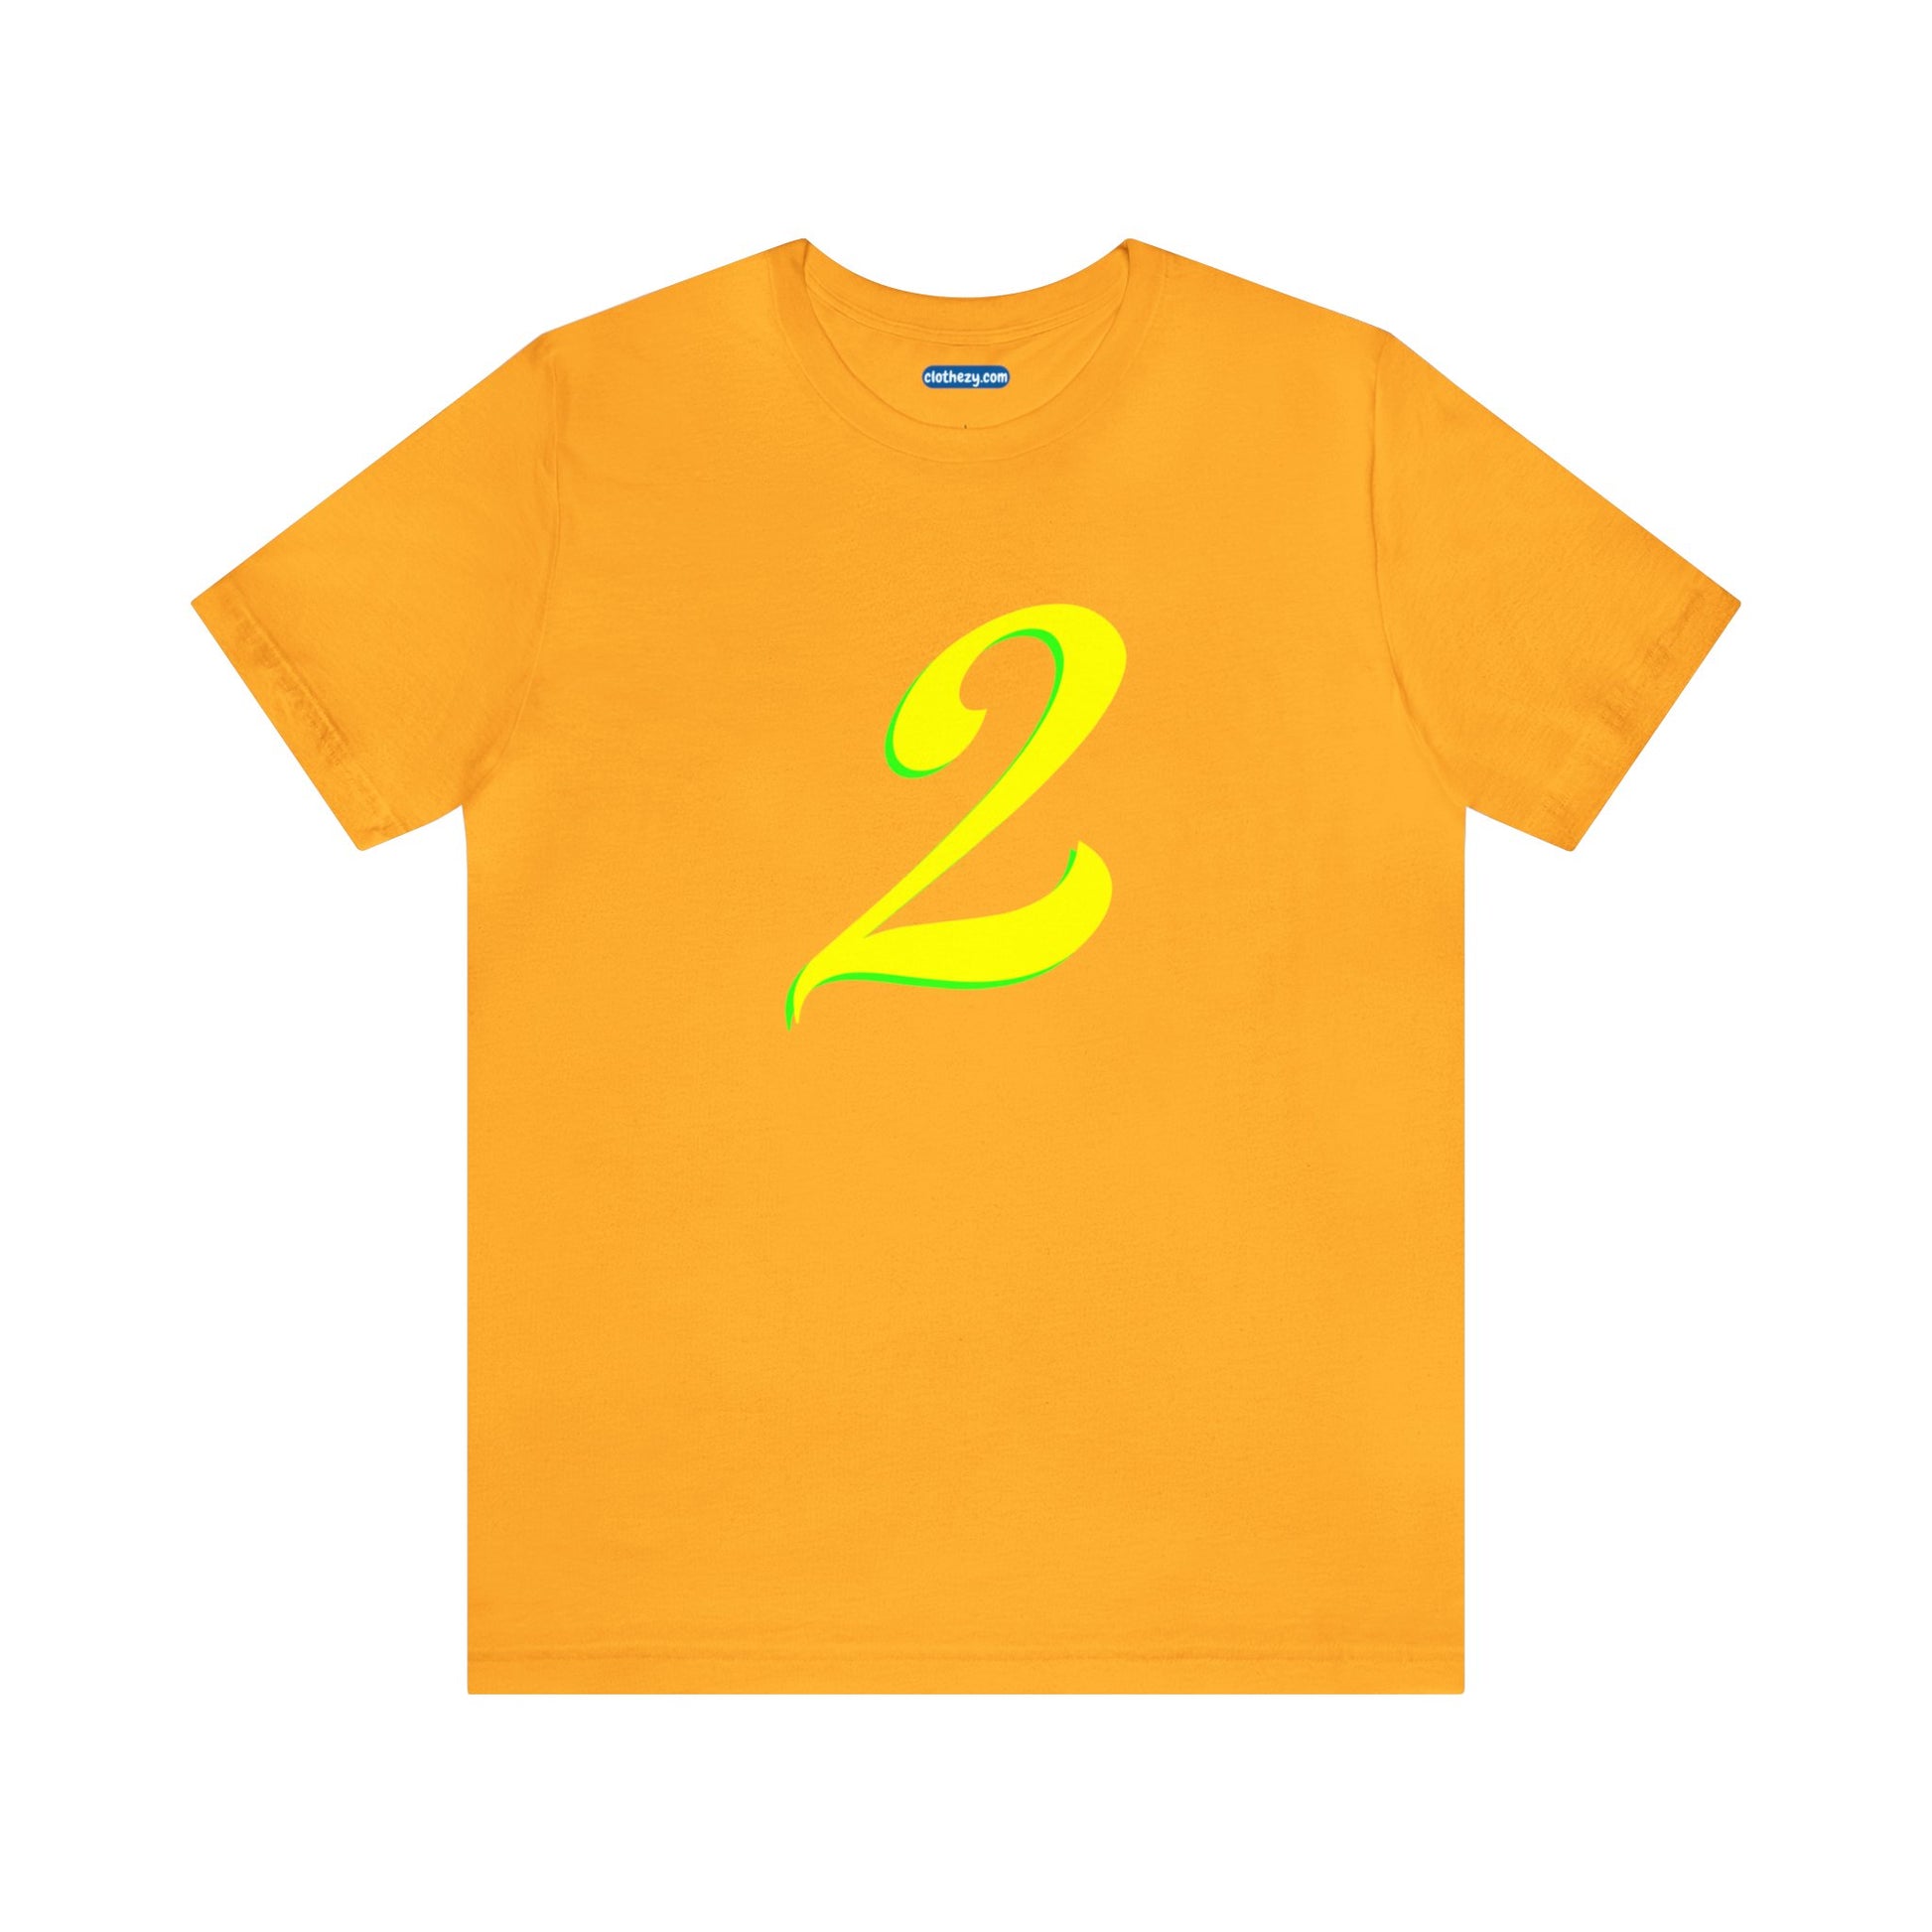 Number 2 Design - Soft Cotton Tee for birthdays and celebrations, Gift for friends and family, Multiple Options by clothezy.com in Green Heather Size Small - Buy Now